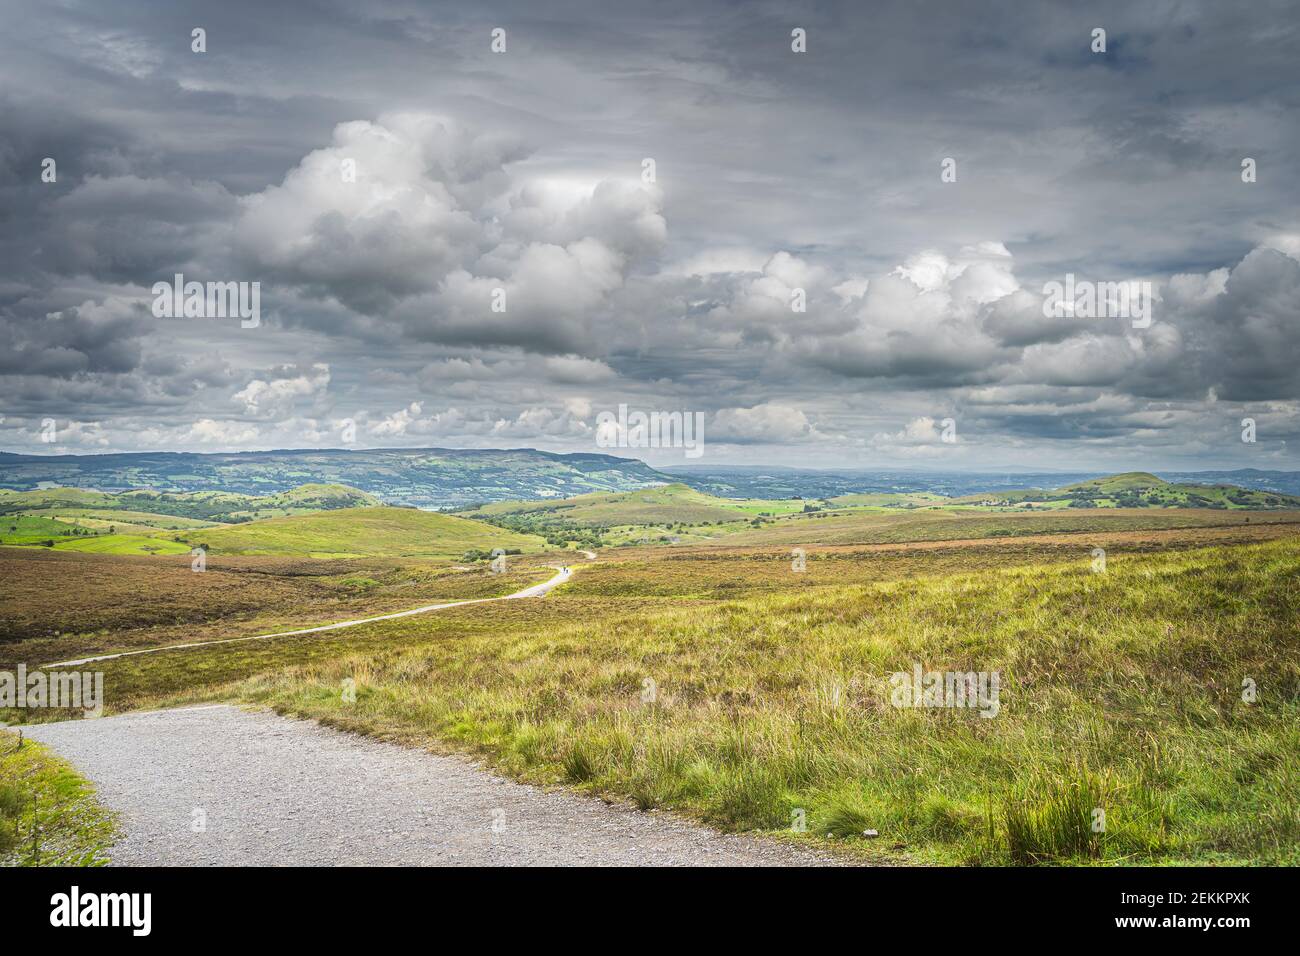 Footpath or trail winding between green hills and peatbog with stormy, dramatic sky in background, Cuilcagh Mountain Park, Northern Ireland Stock Photo